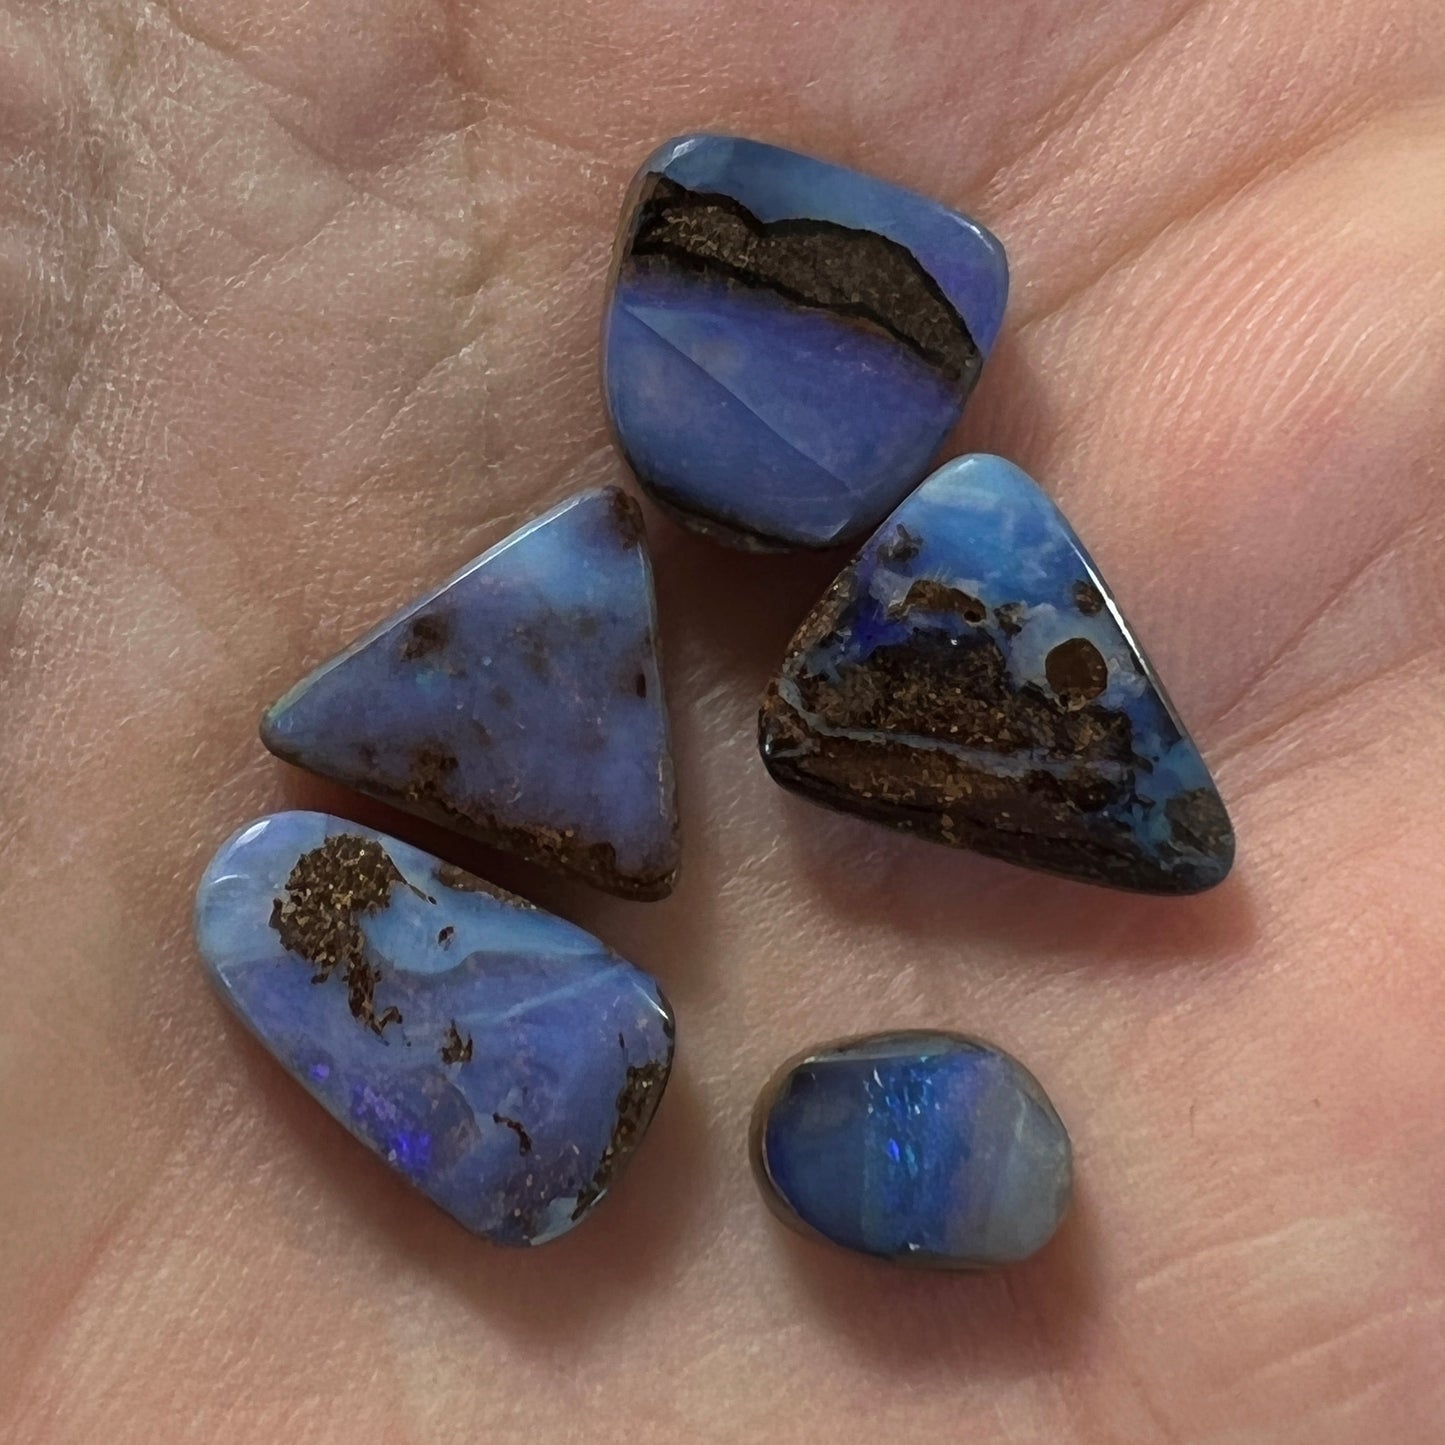 Five lovely pieces of Winton boulder opal. Nice blues and lovely polish.